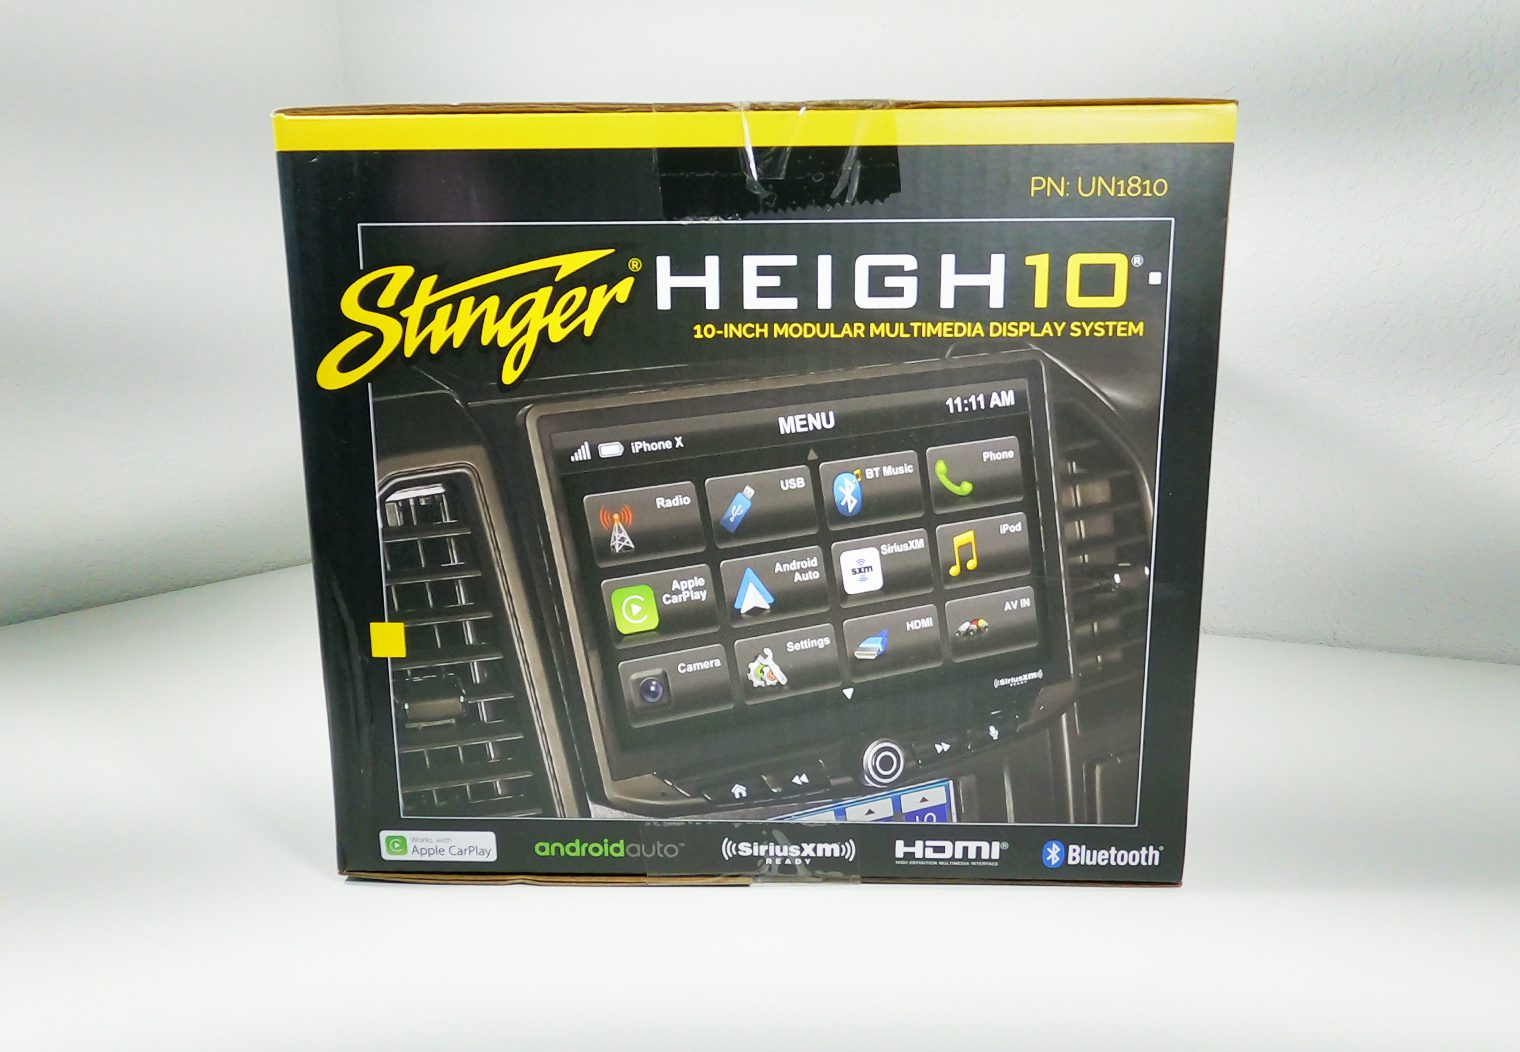 Stinger HEIGH10 in box side